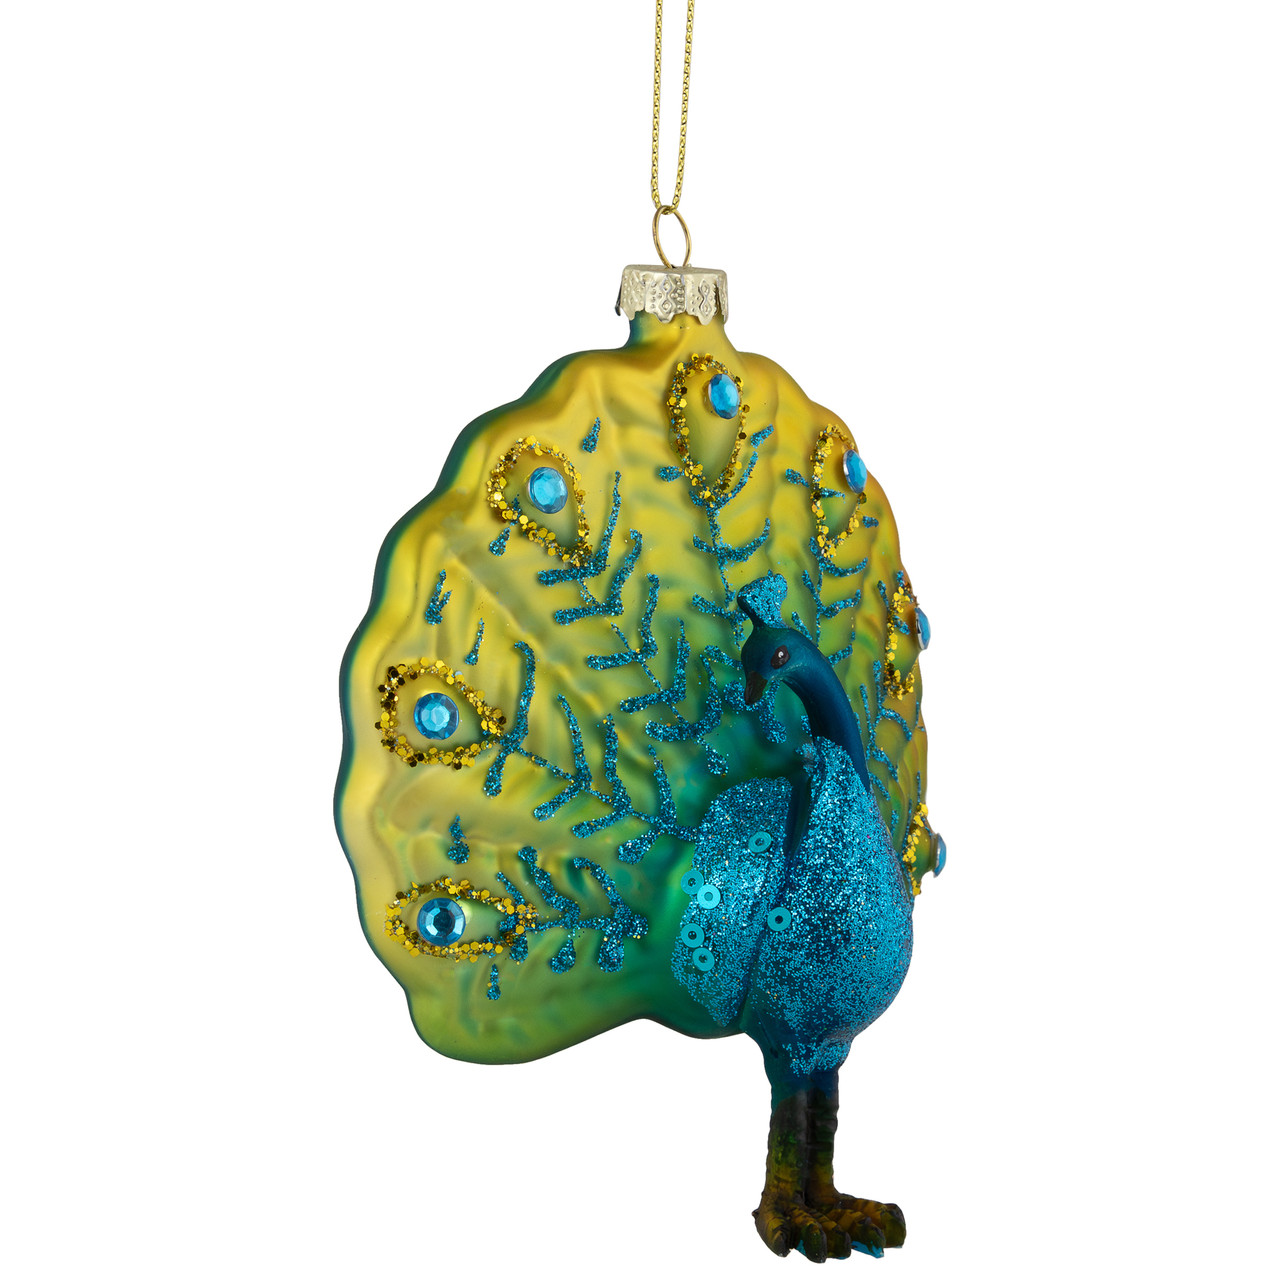 NORTHLIGHT 4.25'' Blue and Green Peacock Glittered Glass Christmas